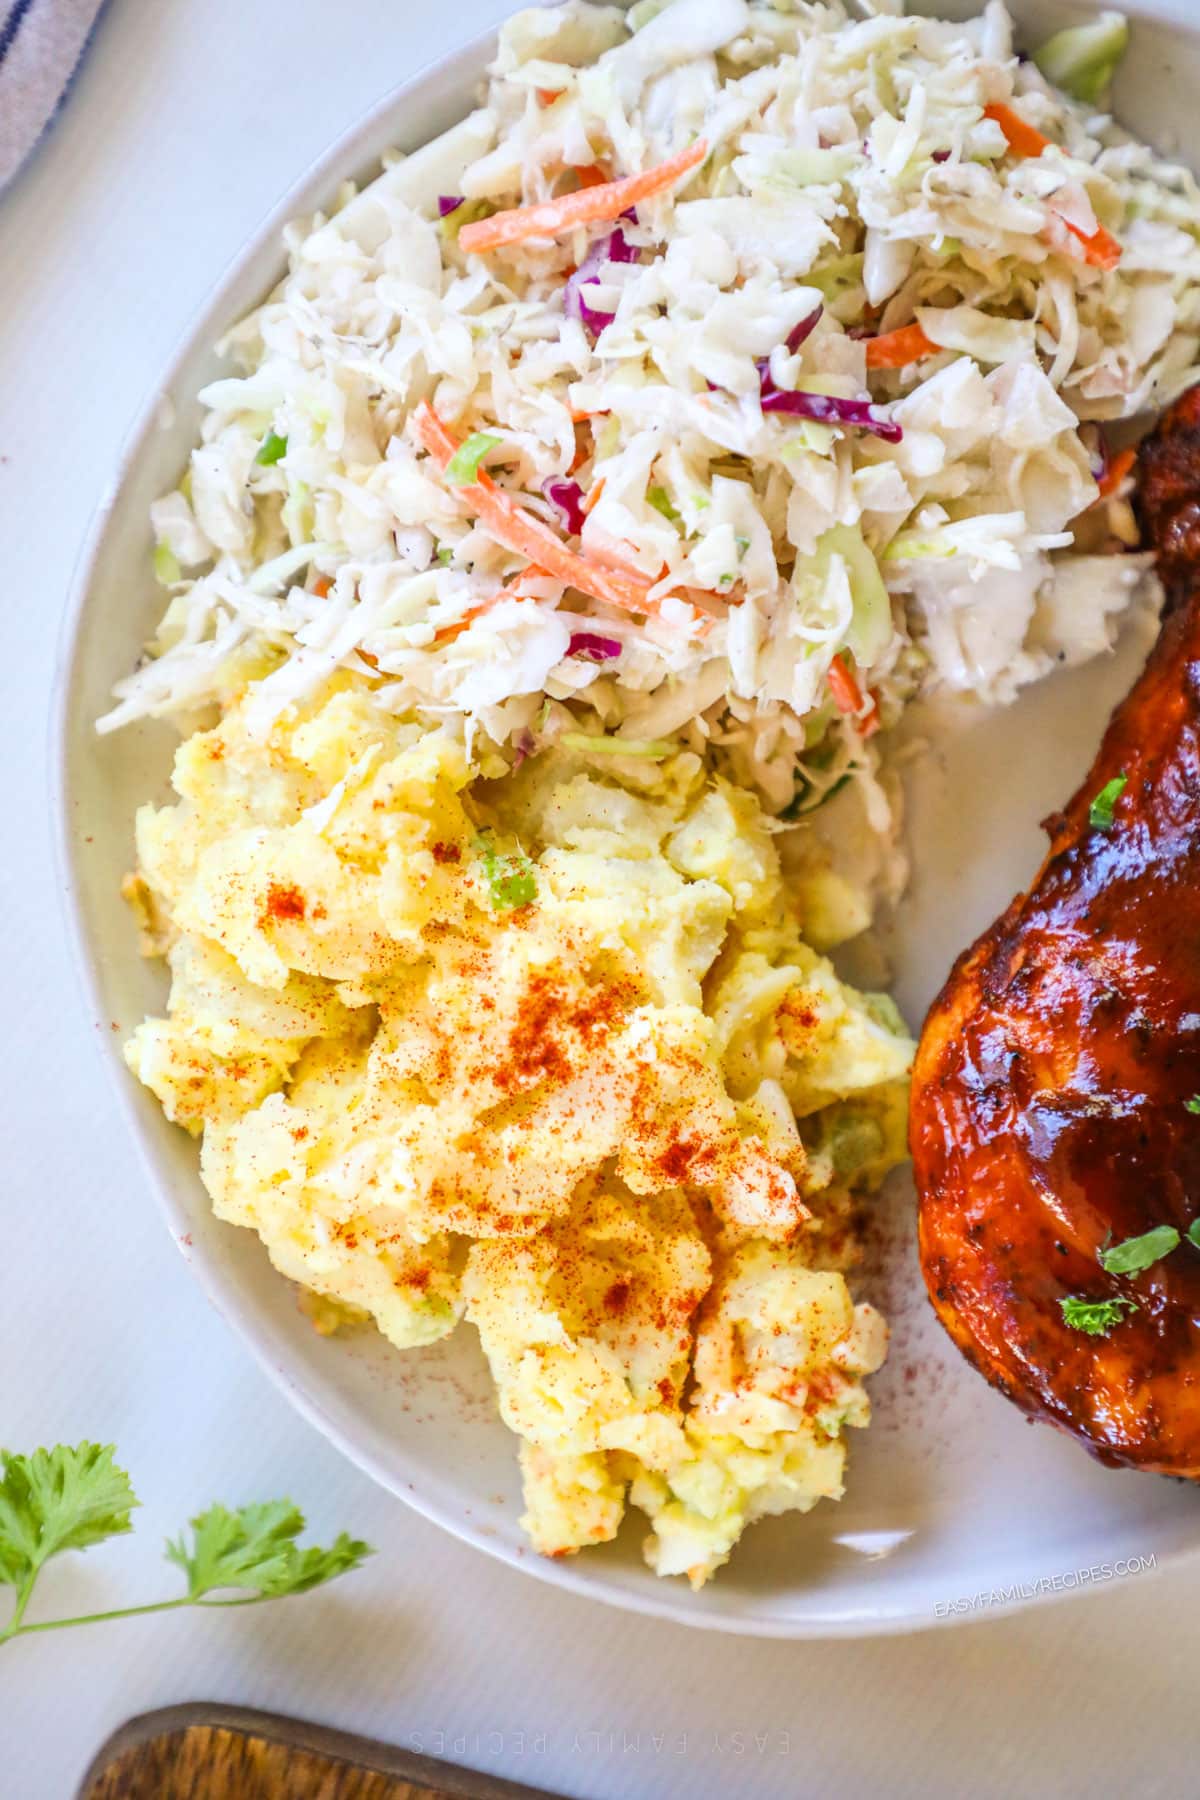 Potato salad with eggs on a plate with coleslaw and bbq'd meat.